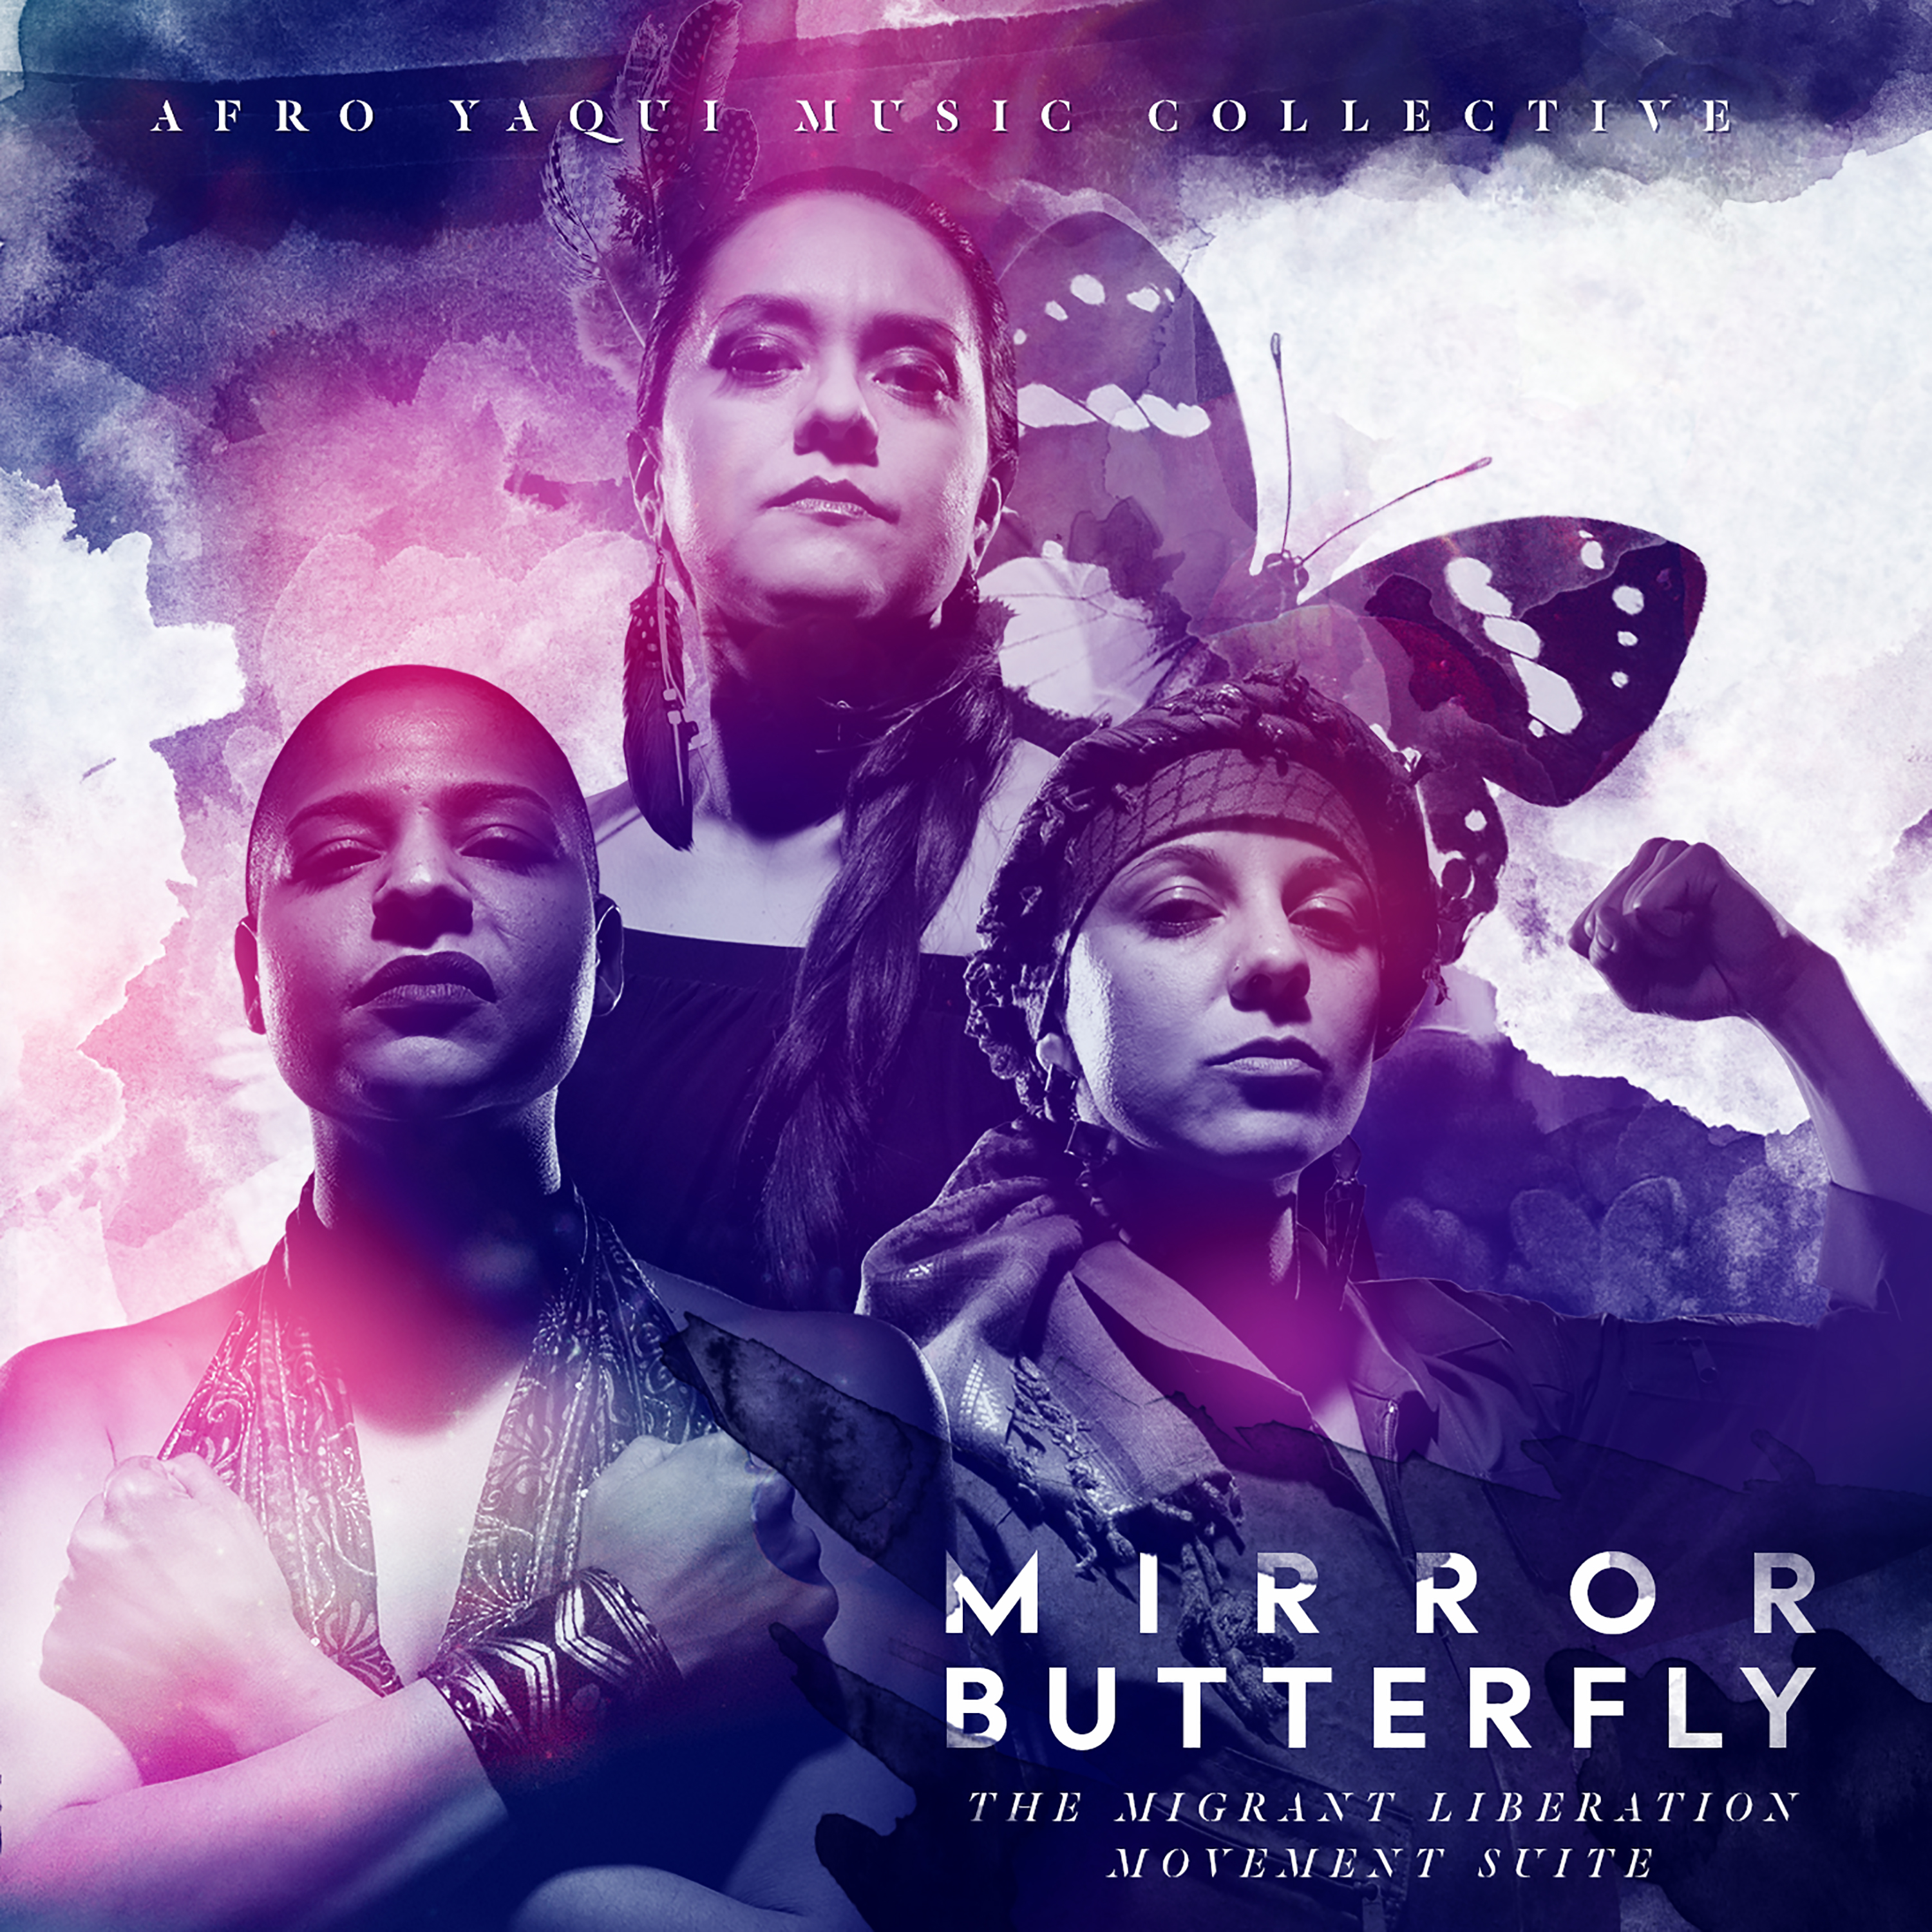 Review: Afro Yaqui Music Collective – Mirror Butterfly: The Migrant Liberation Movement Suite